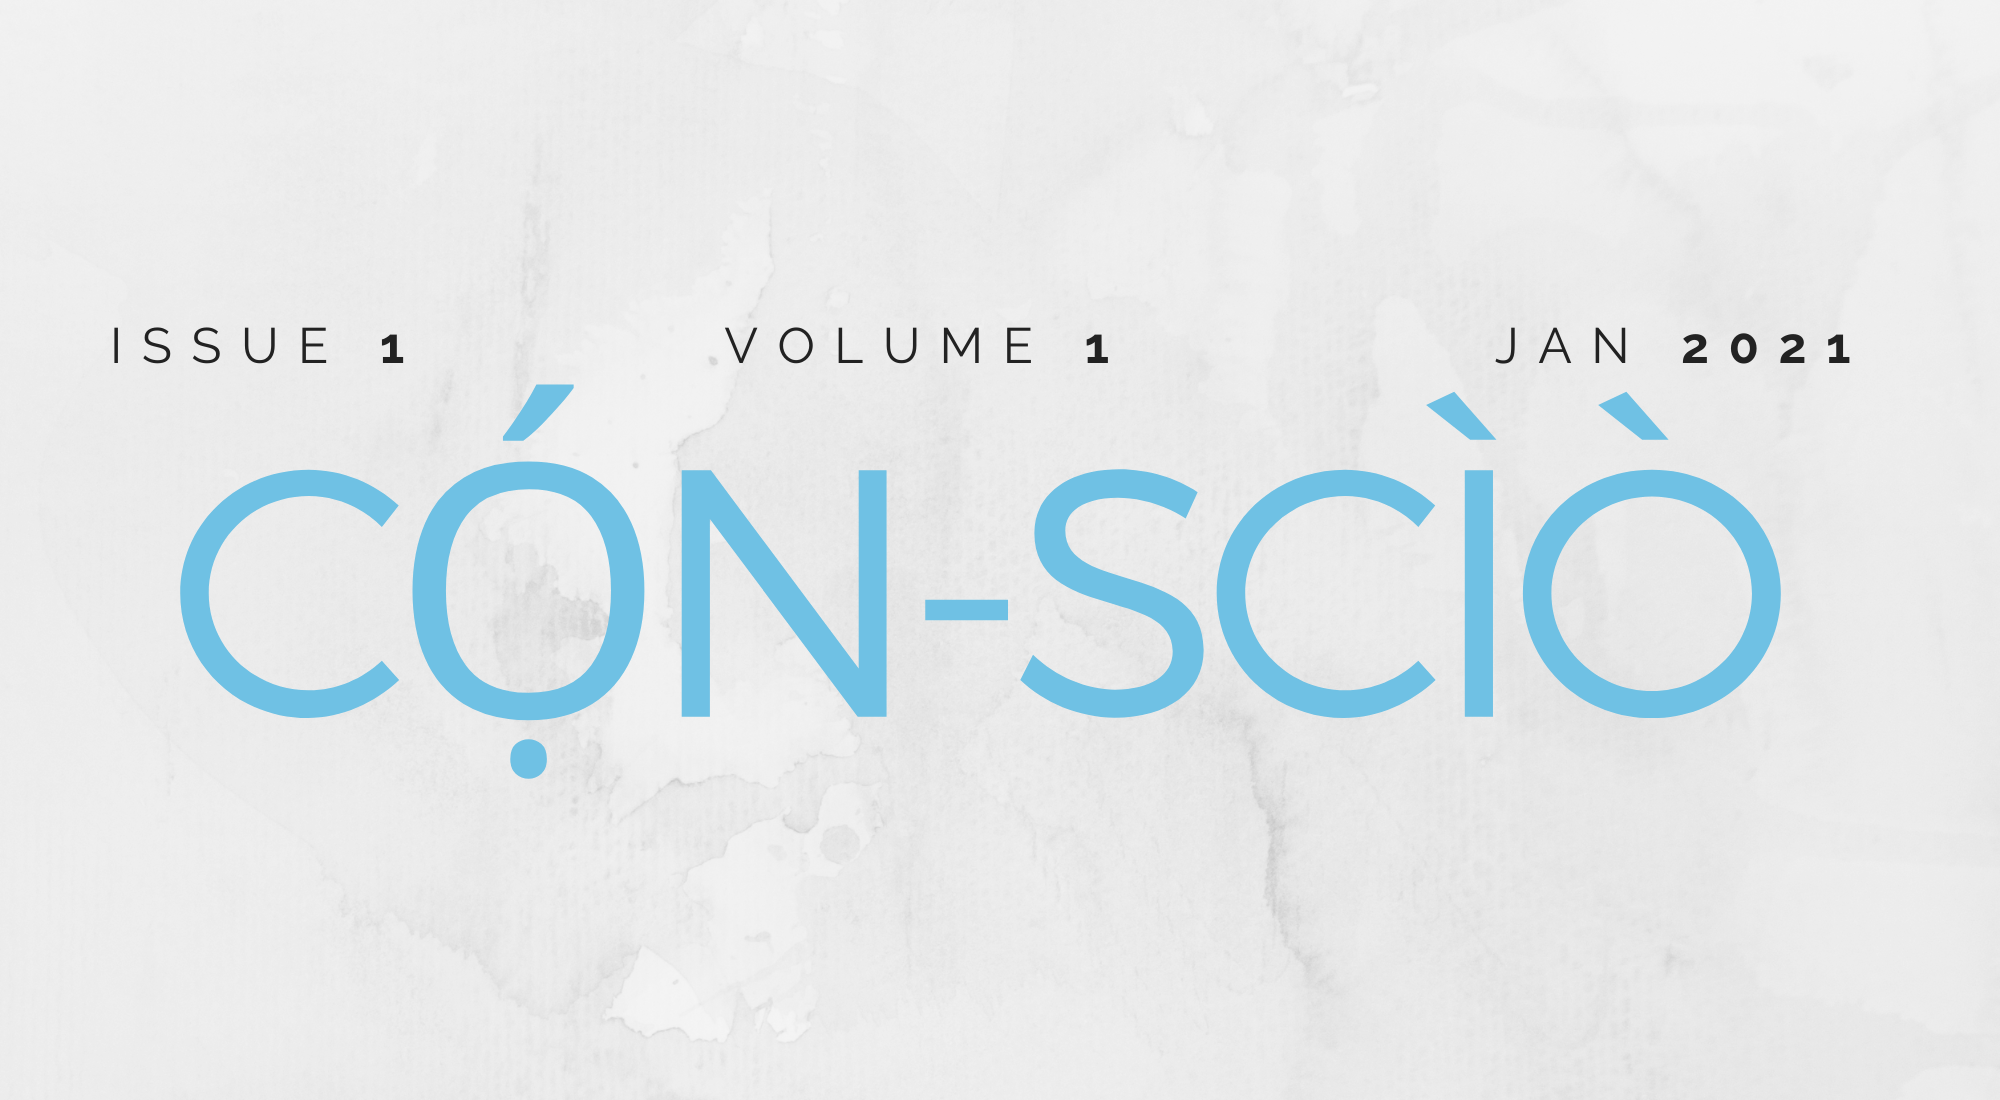 CỌ́N-SCÌÒ MAGAZINE: ‘THE LOCKDOWN’ [ISSUE 1, VOL. 1 | JANUARY 2021] IS OUT